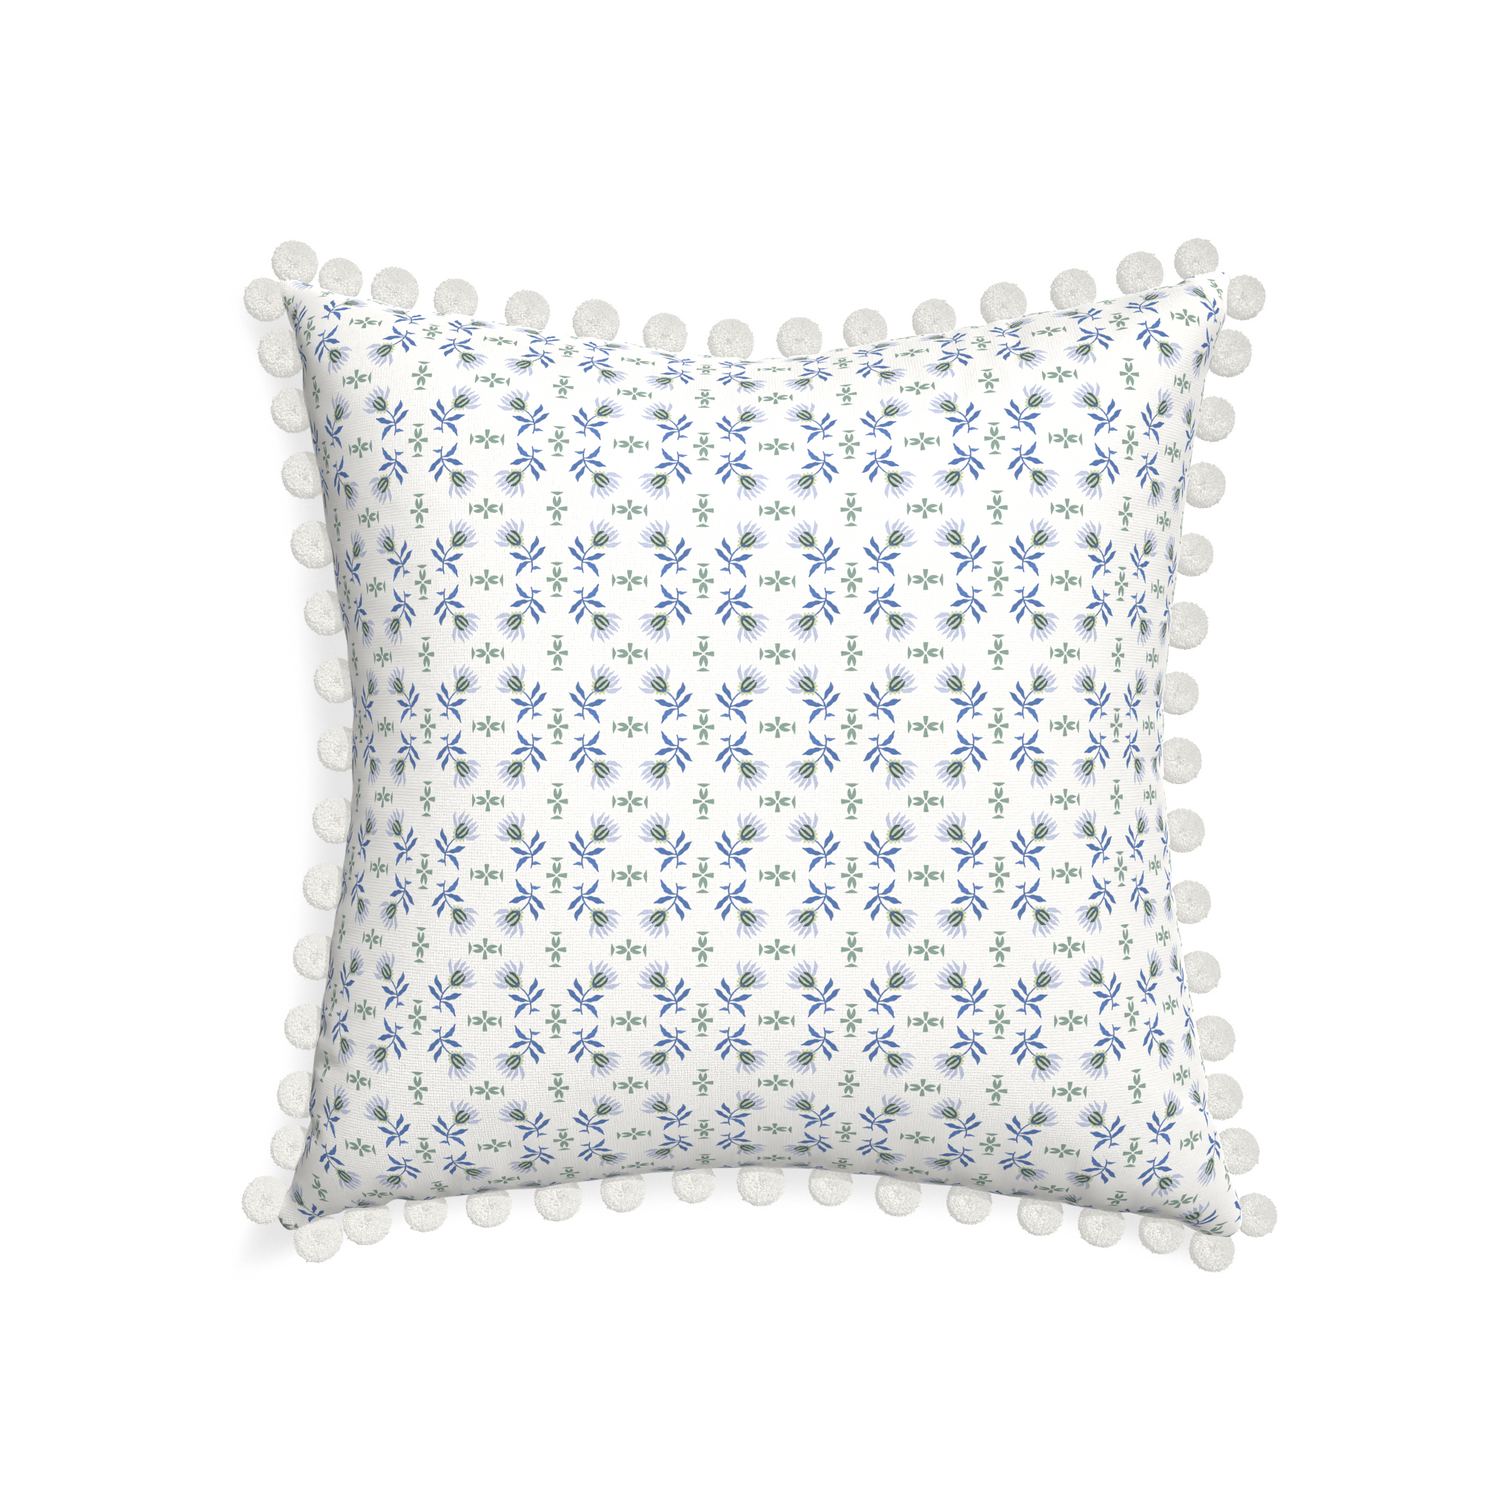 22-square lee custom pillow with snow pom pom on white background